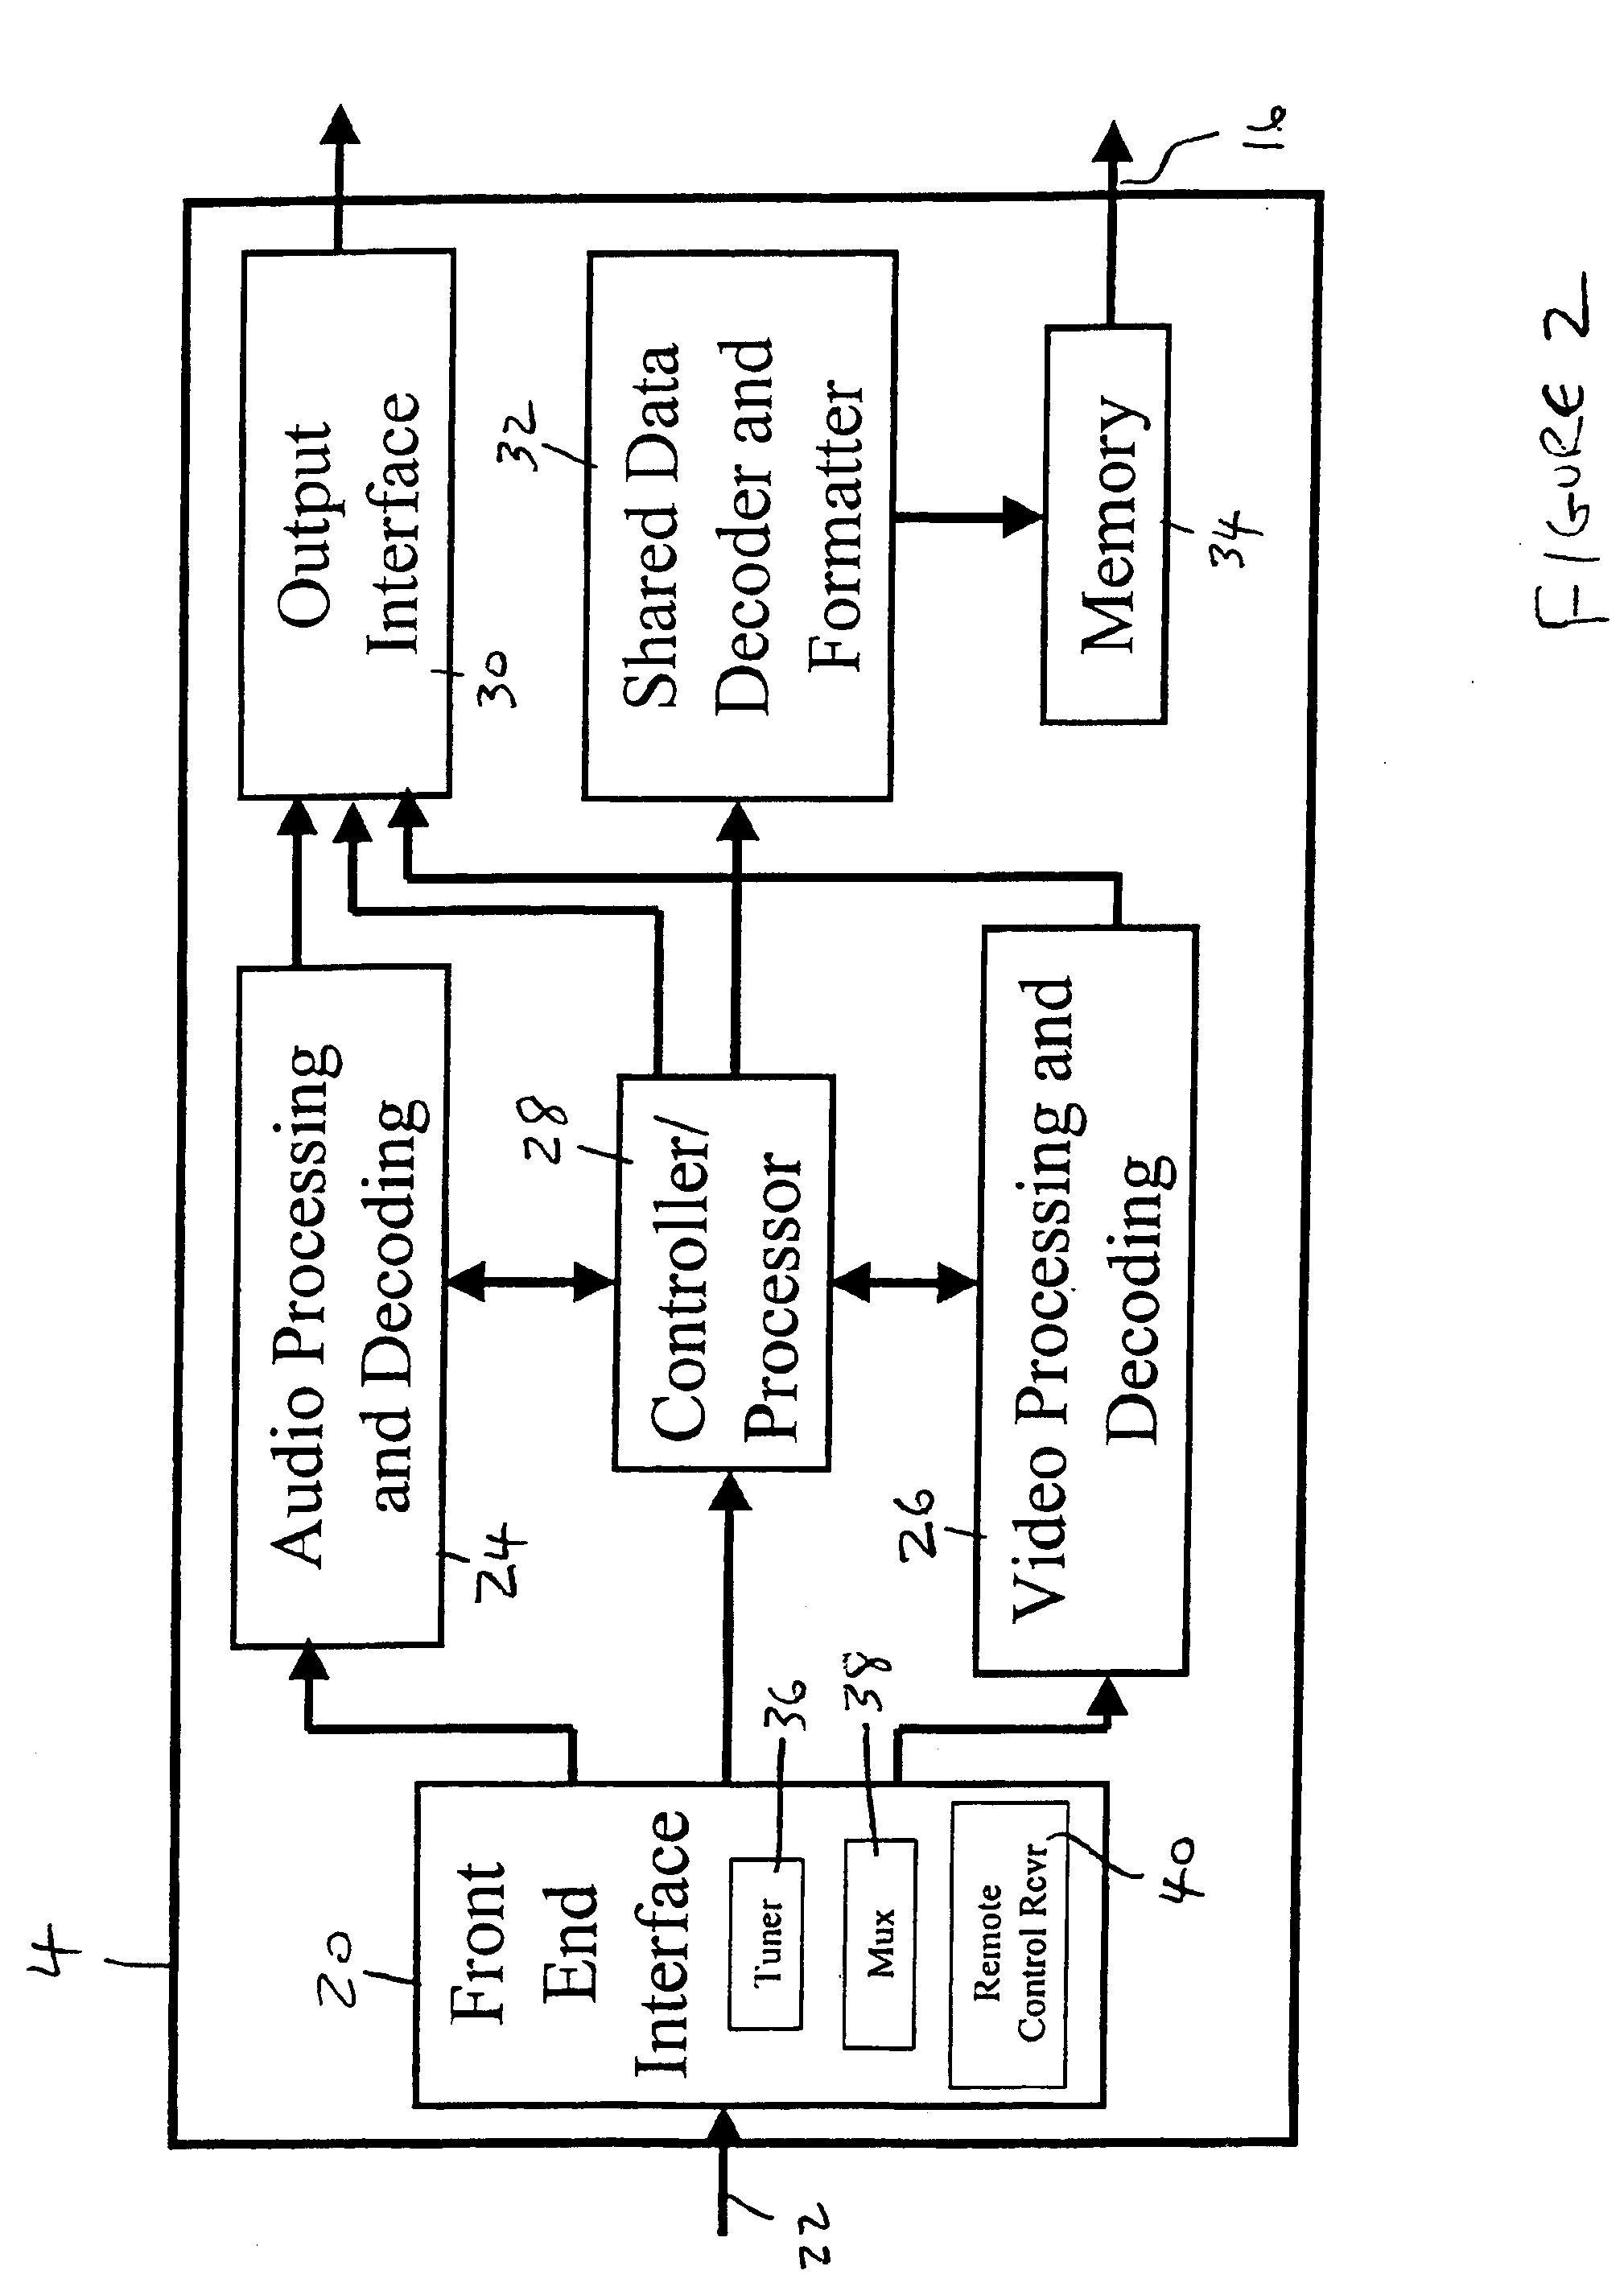 Television receiver with shared data port and control software